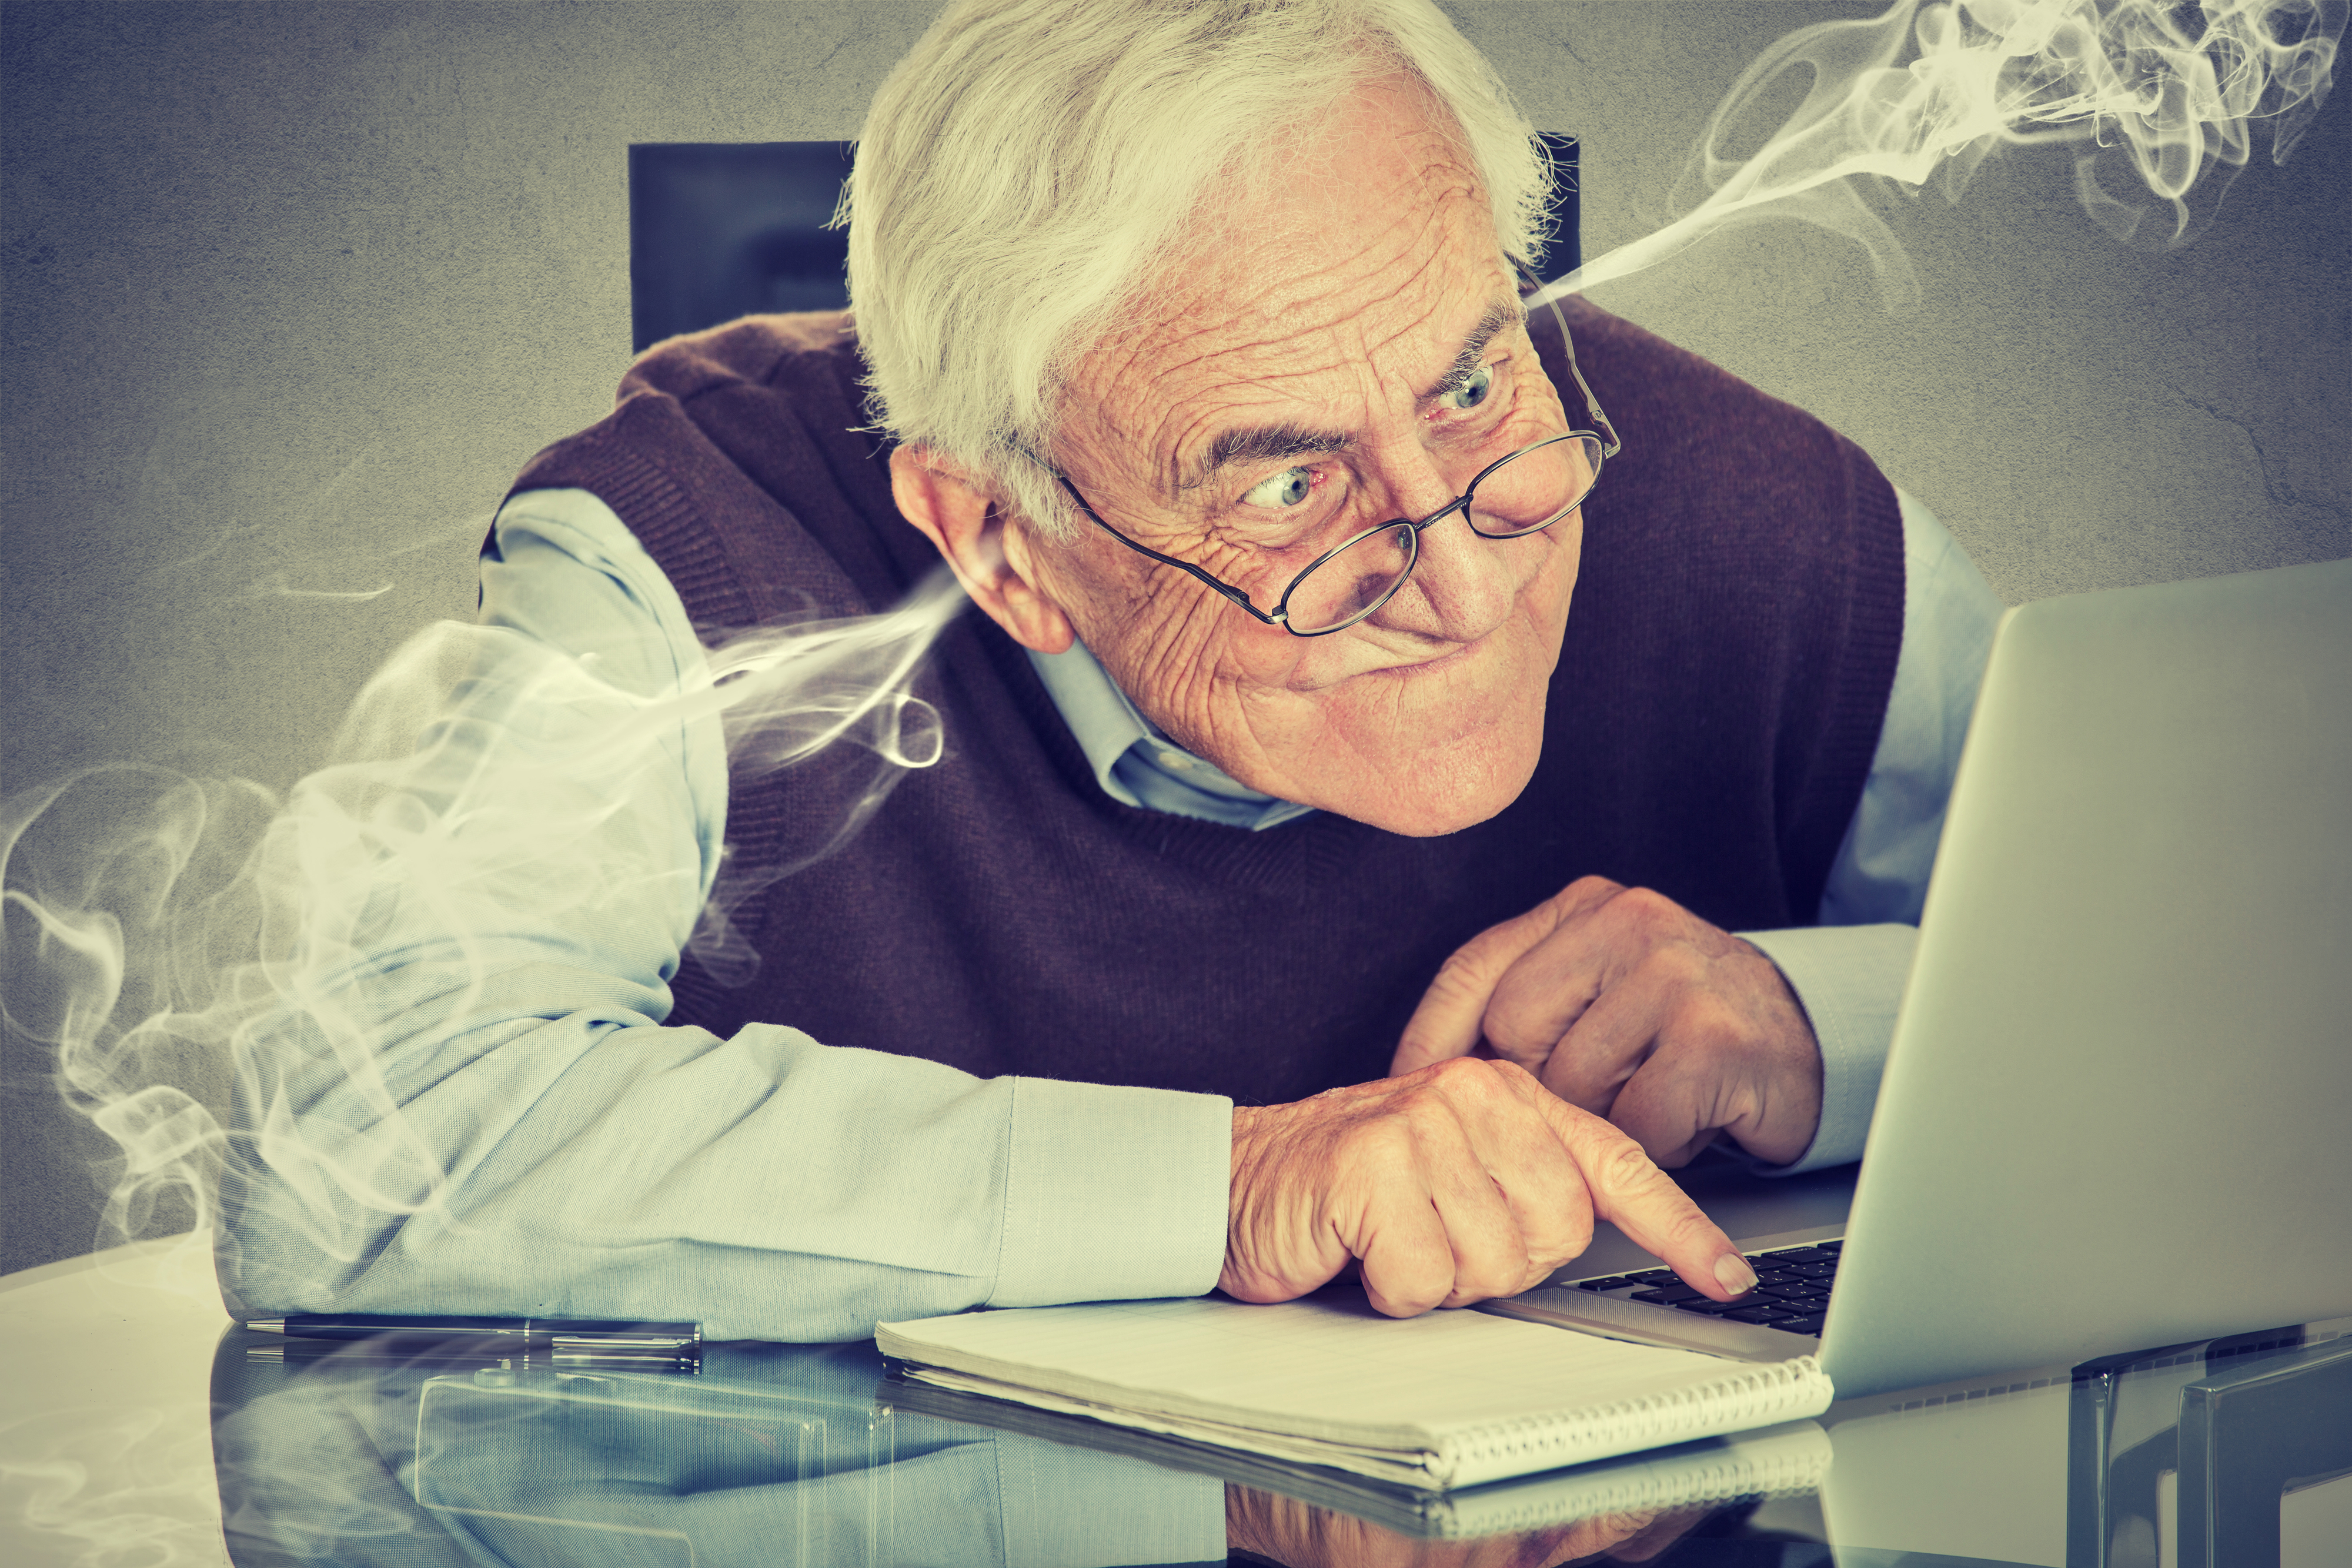 Elderly man intensely looking at a laptop screen with steam coming out of his ears, possibly representing frustration or confusion